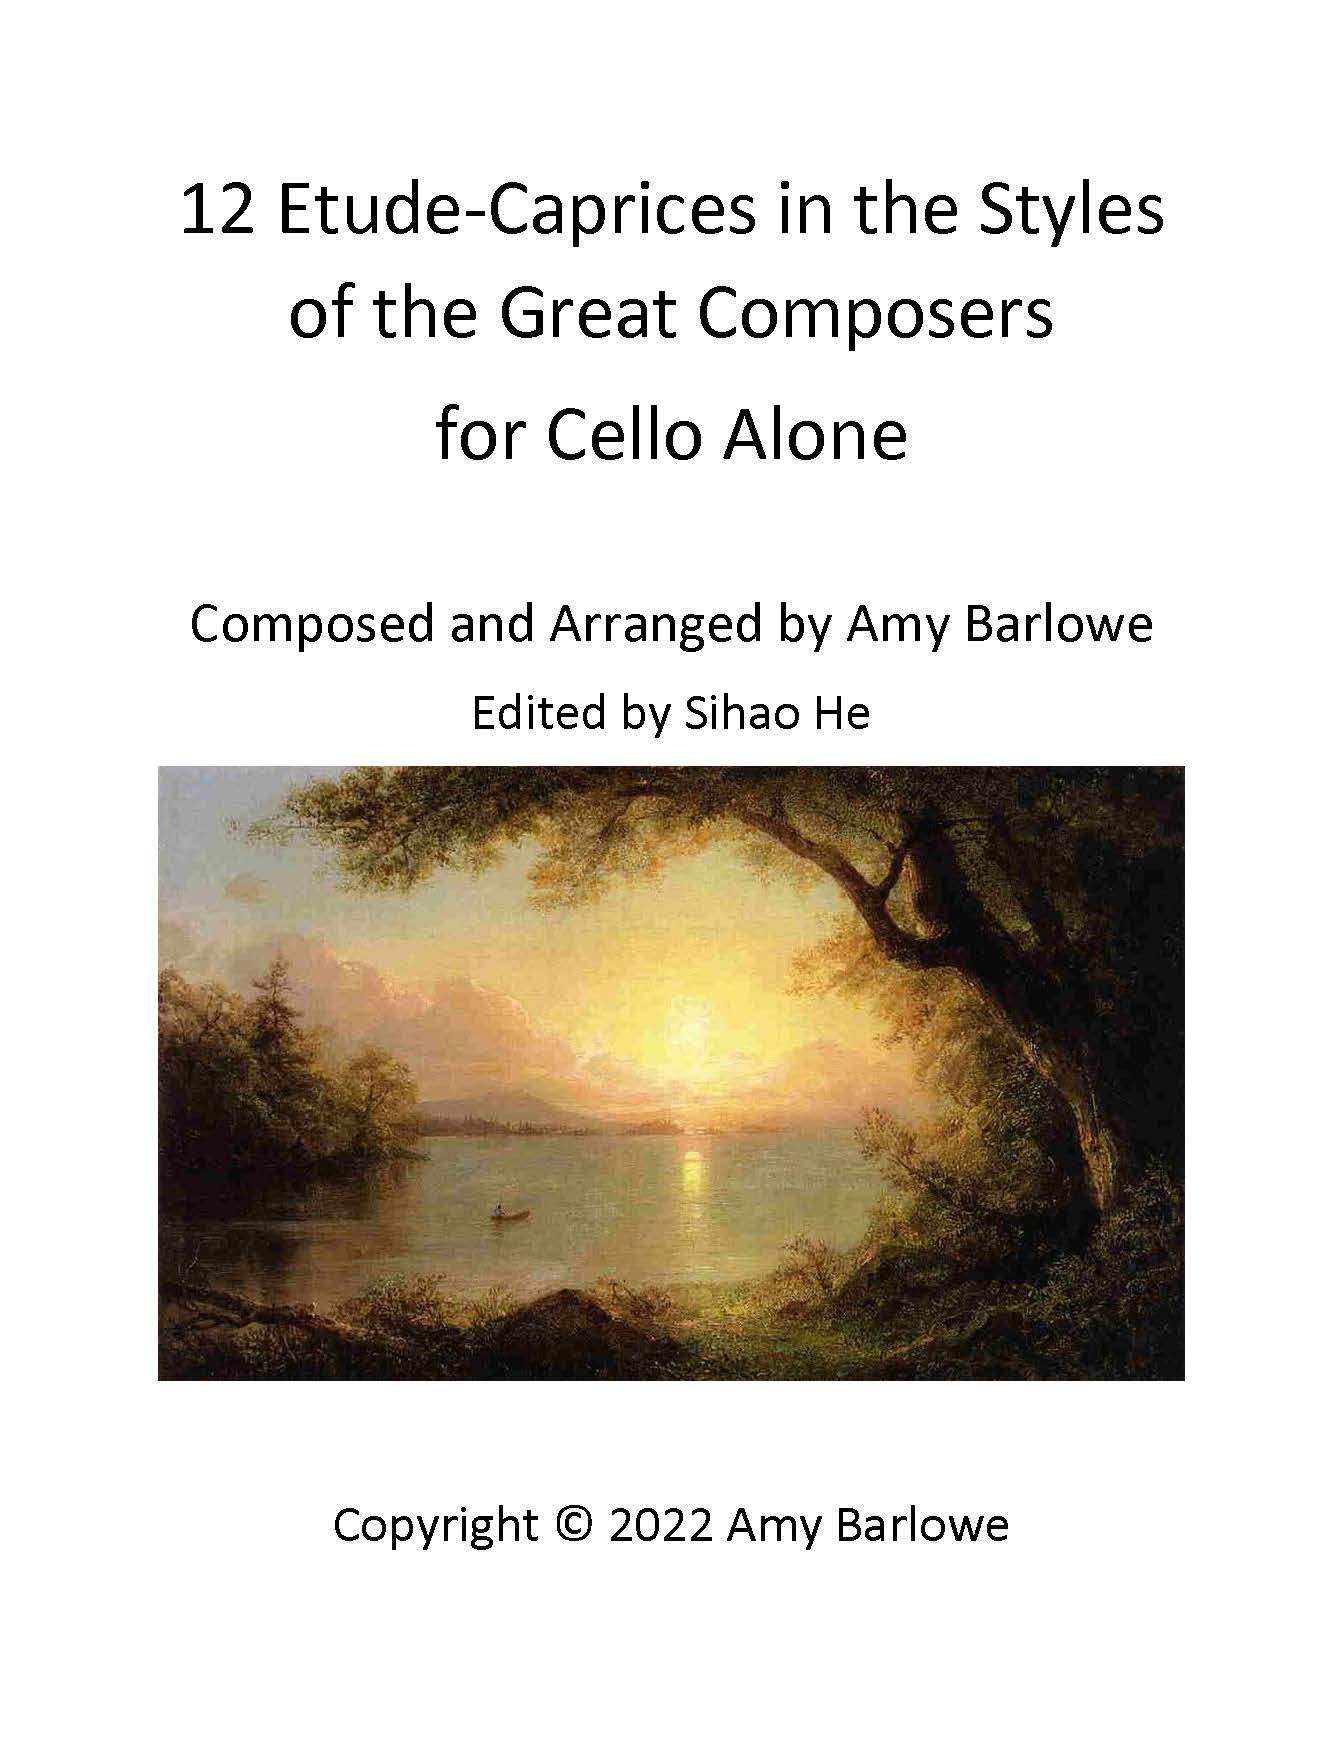 Barlowe 12 Etude-Caprices in the Styles of the Great Composers for Cello Alone